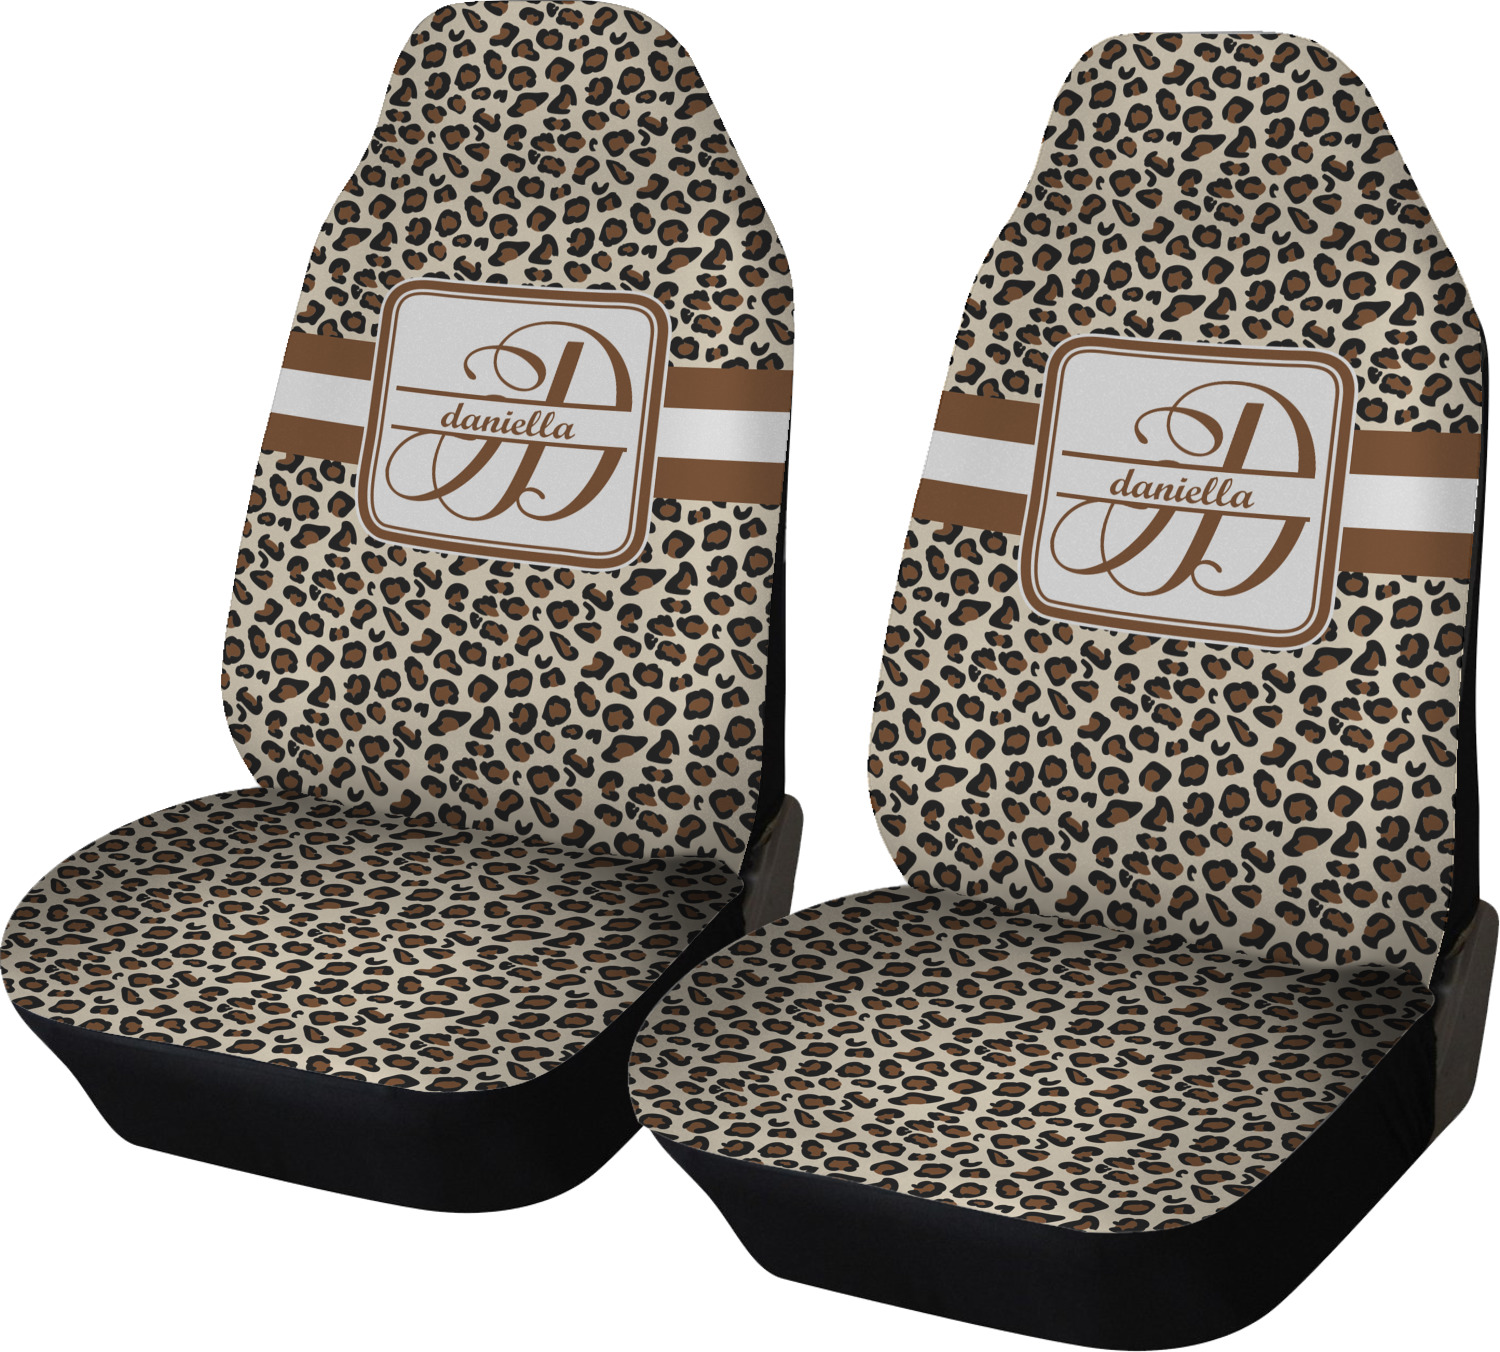 https://www.youcustomizeit.com/common/MAKE/74570/Leopard-Print-Car-Seat-Covers.jpg?lm=1670566762